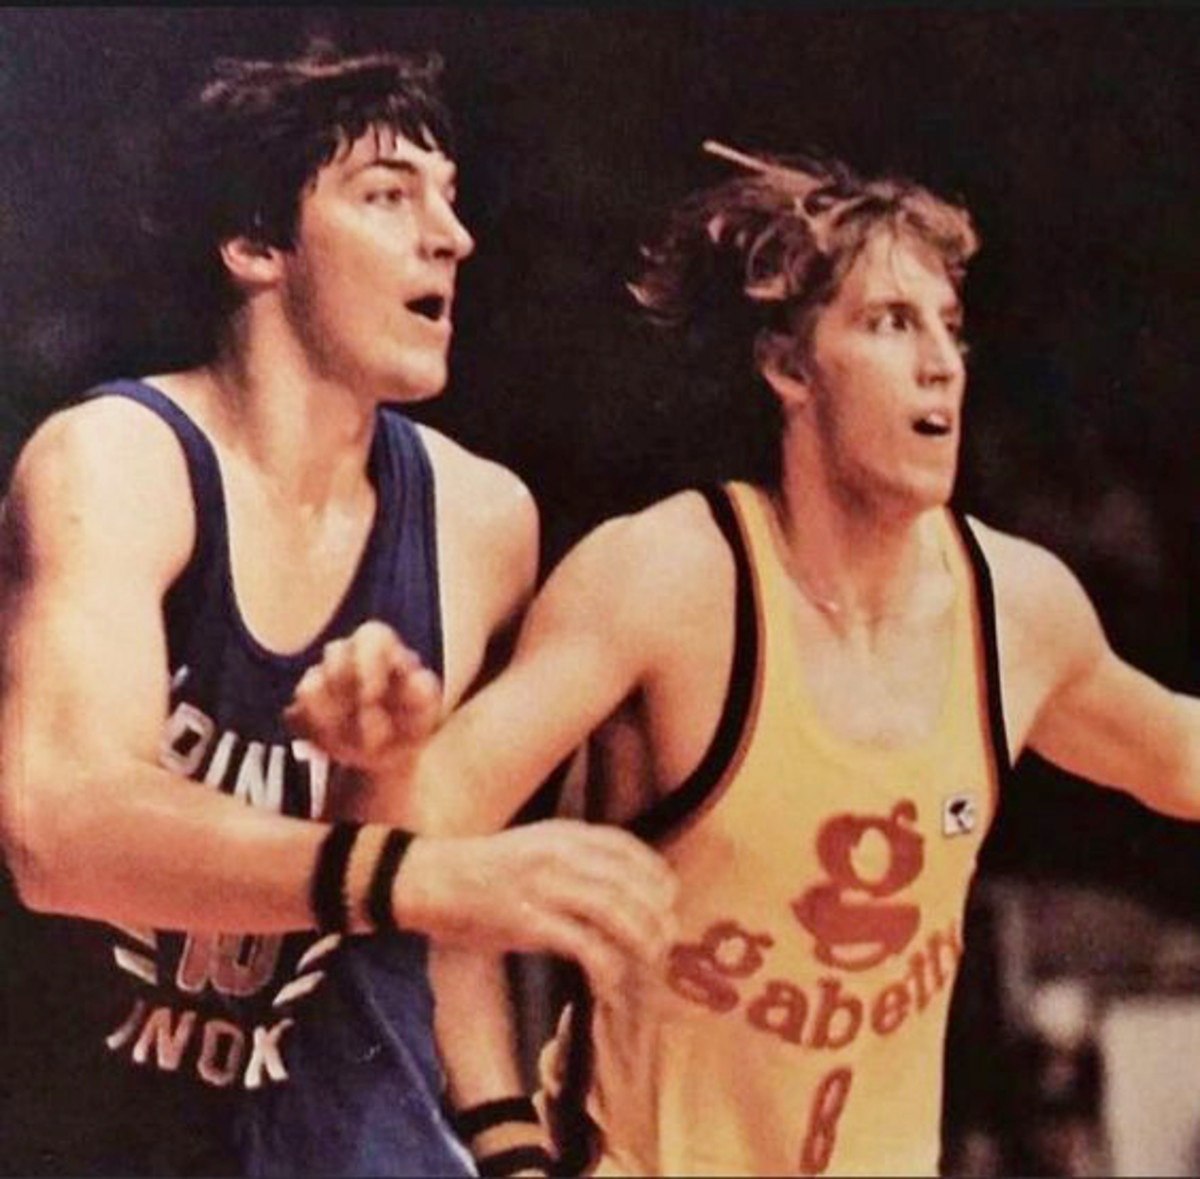  Bruce Flowers (right) tangling with Bill Laimbeer during a game in Italy.